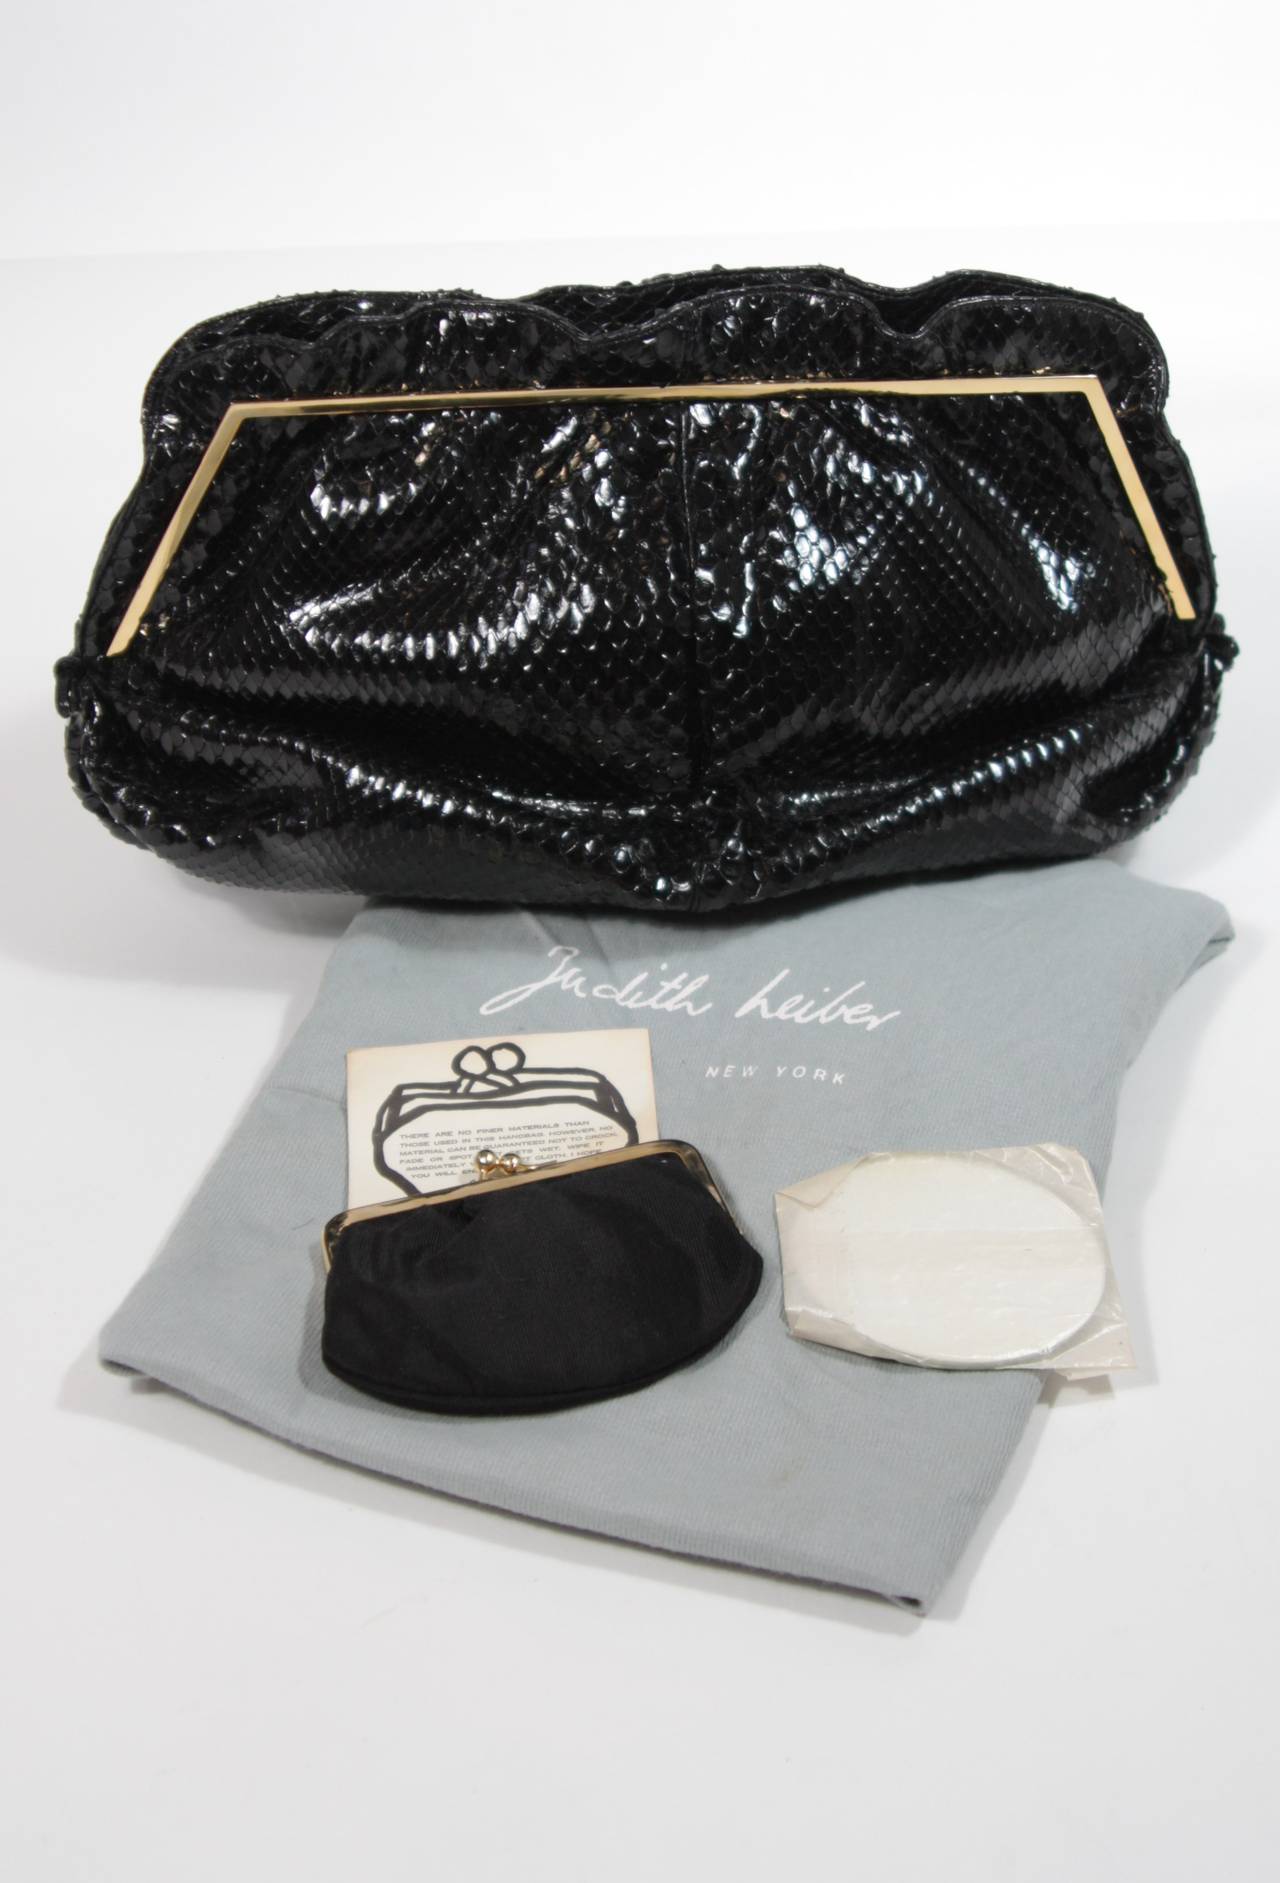 Women's Judith Leiber Black Gathered Snakeskin Clutch with Gold Hardware